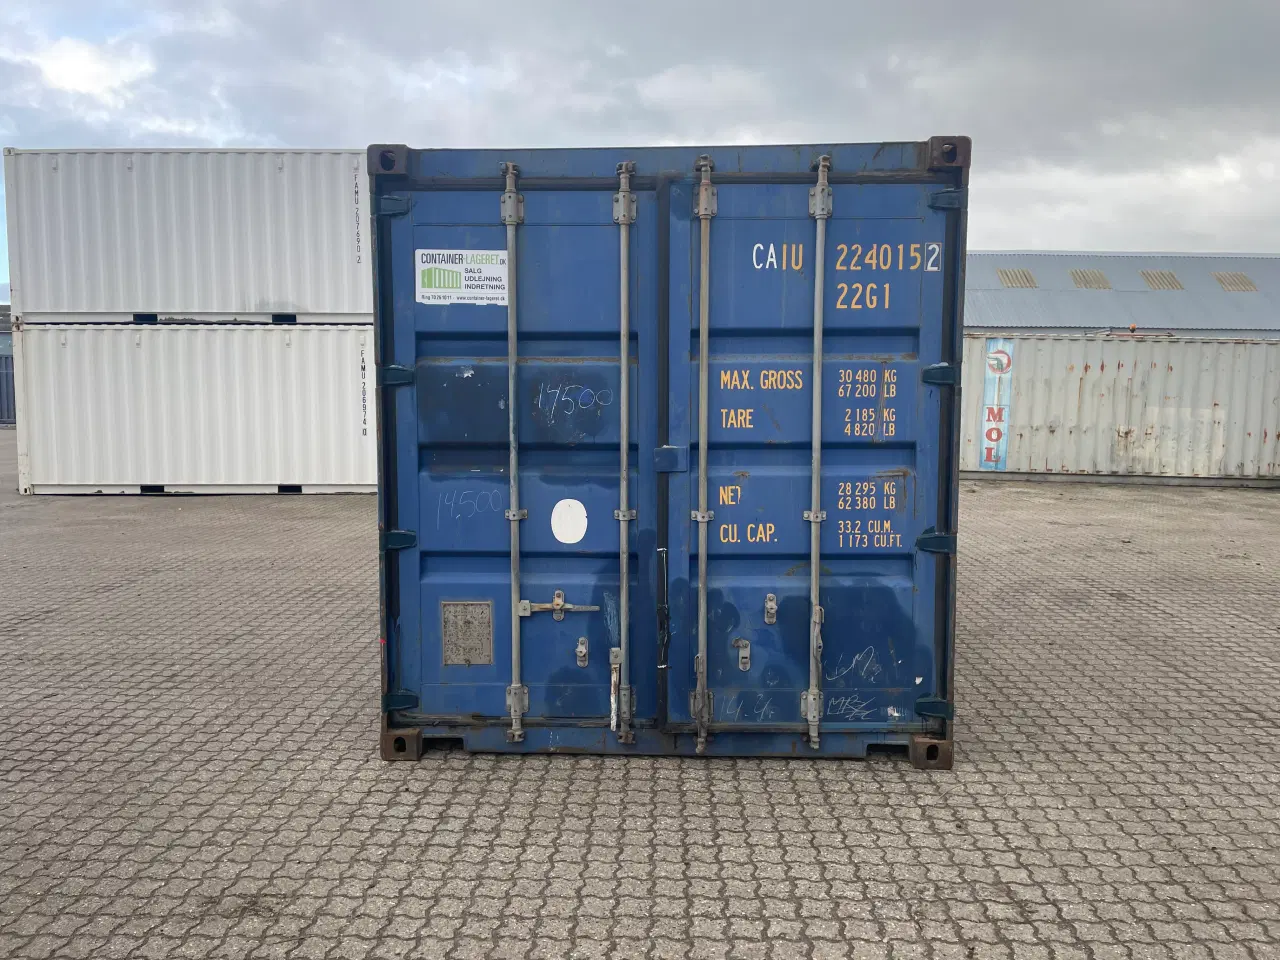 Billede 1 - 20 fods Container - ID: CAIU 224015-2